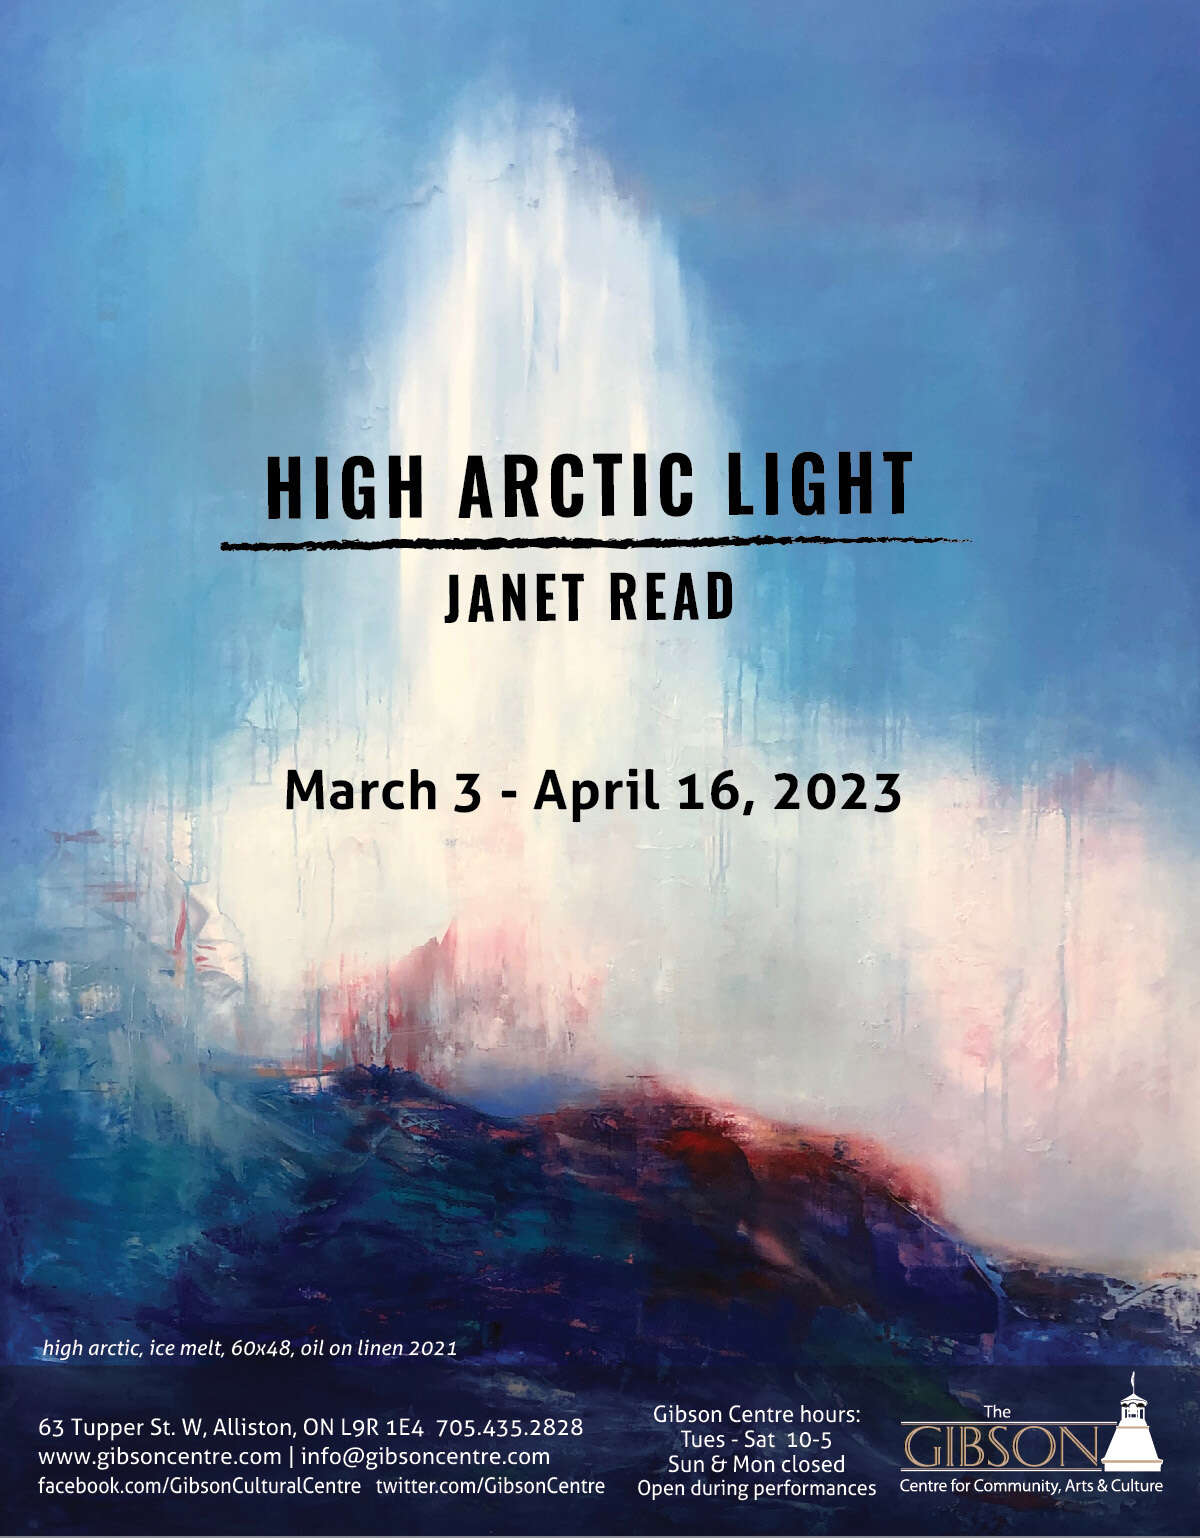 High Arctic Light by Janet Read